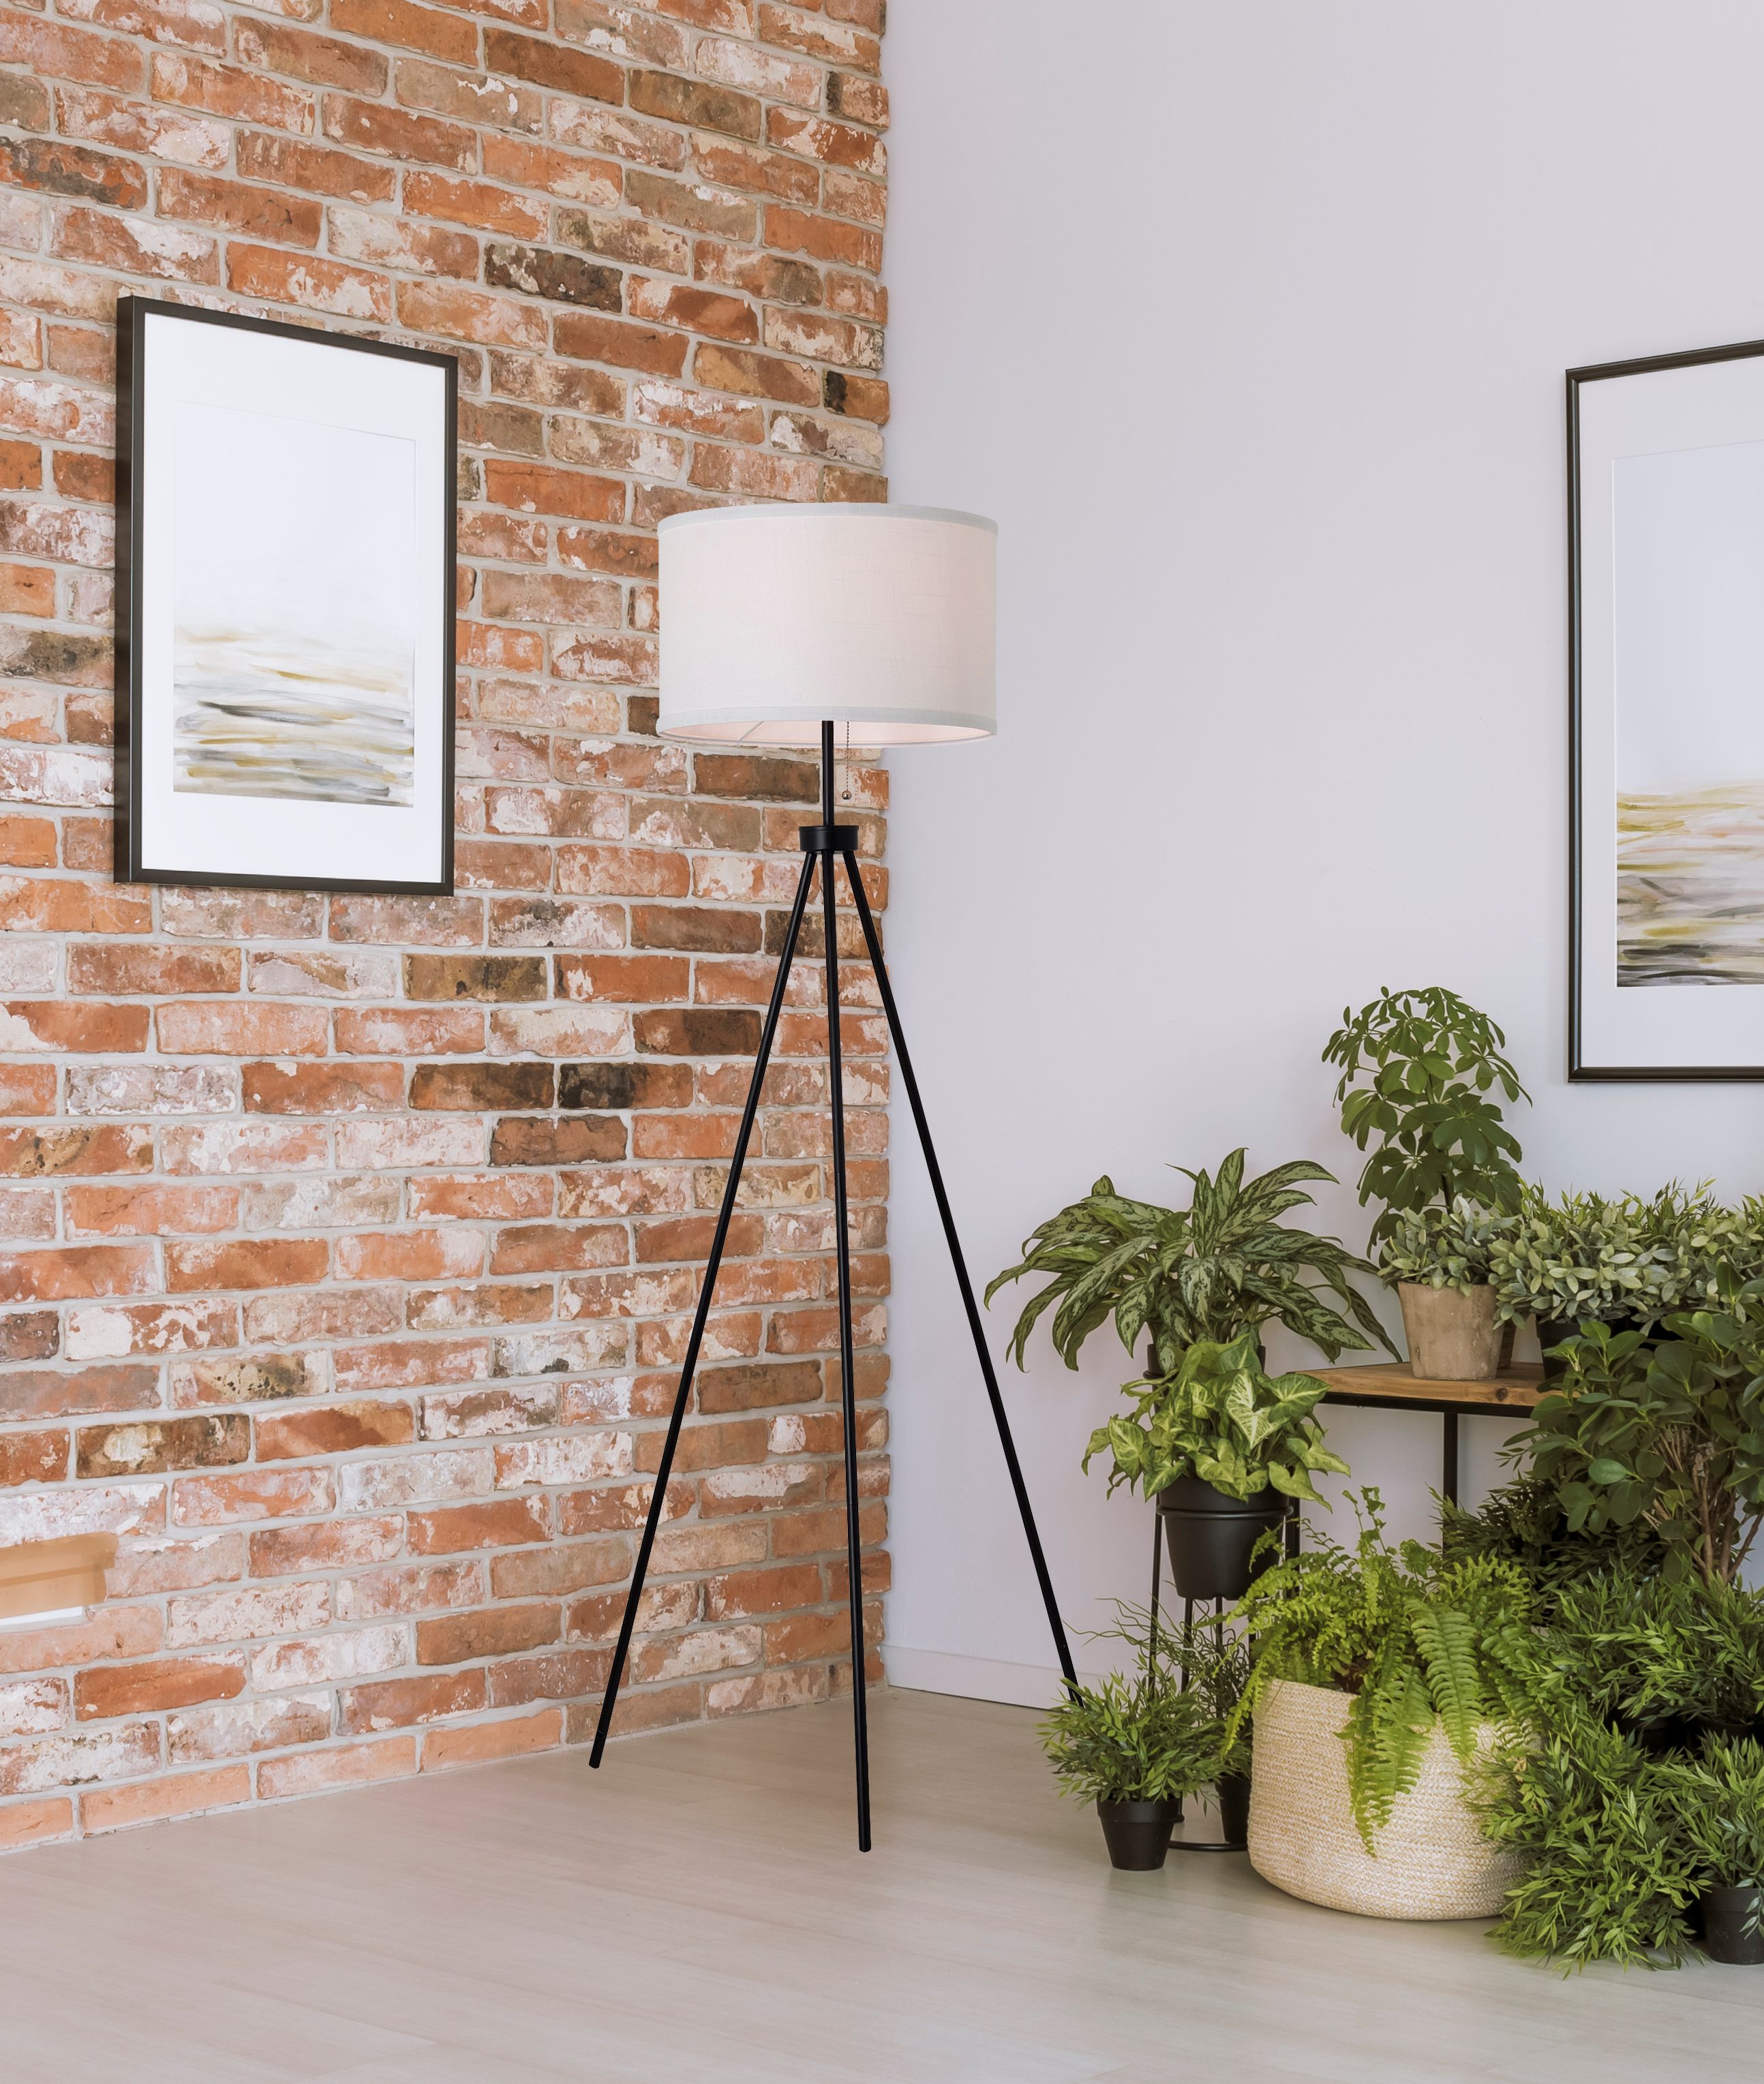 Mainstays 58" Black Metal Tripod Floor Lamp, Modern, Young Adult Dorms and Adult Home Office Use. - image 2 of 5